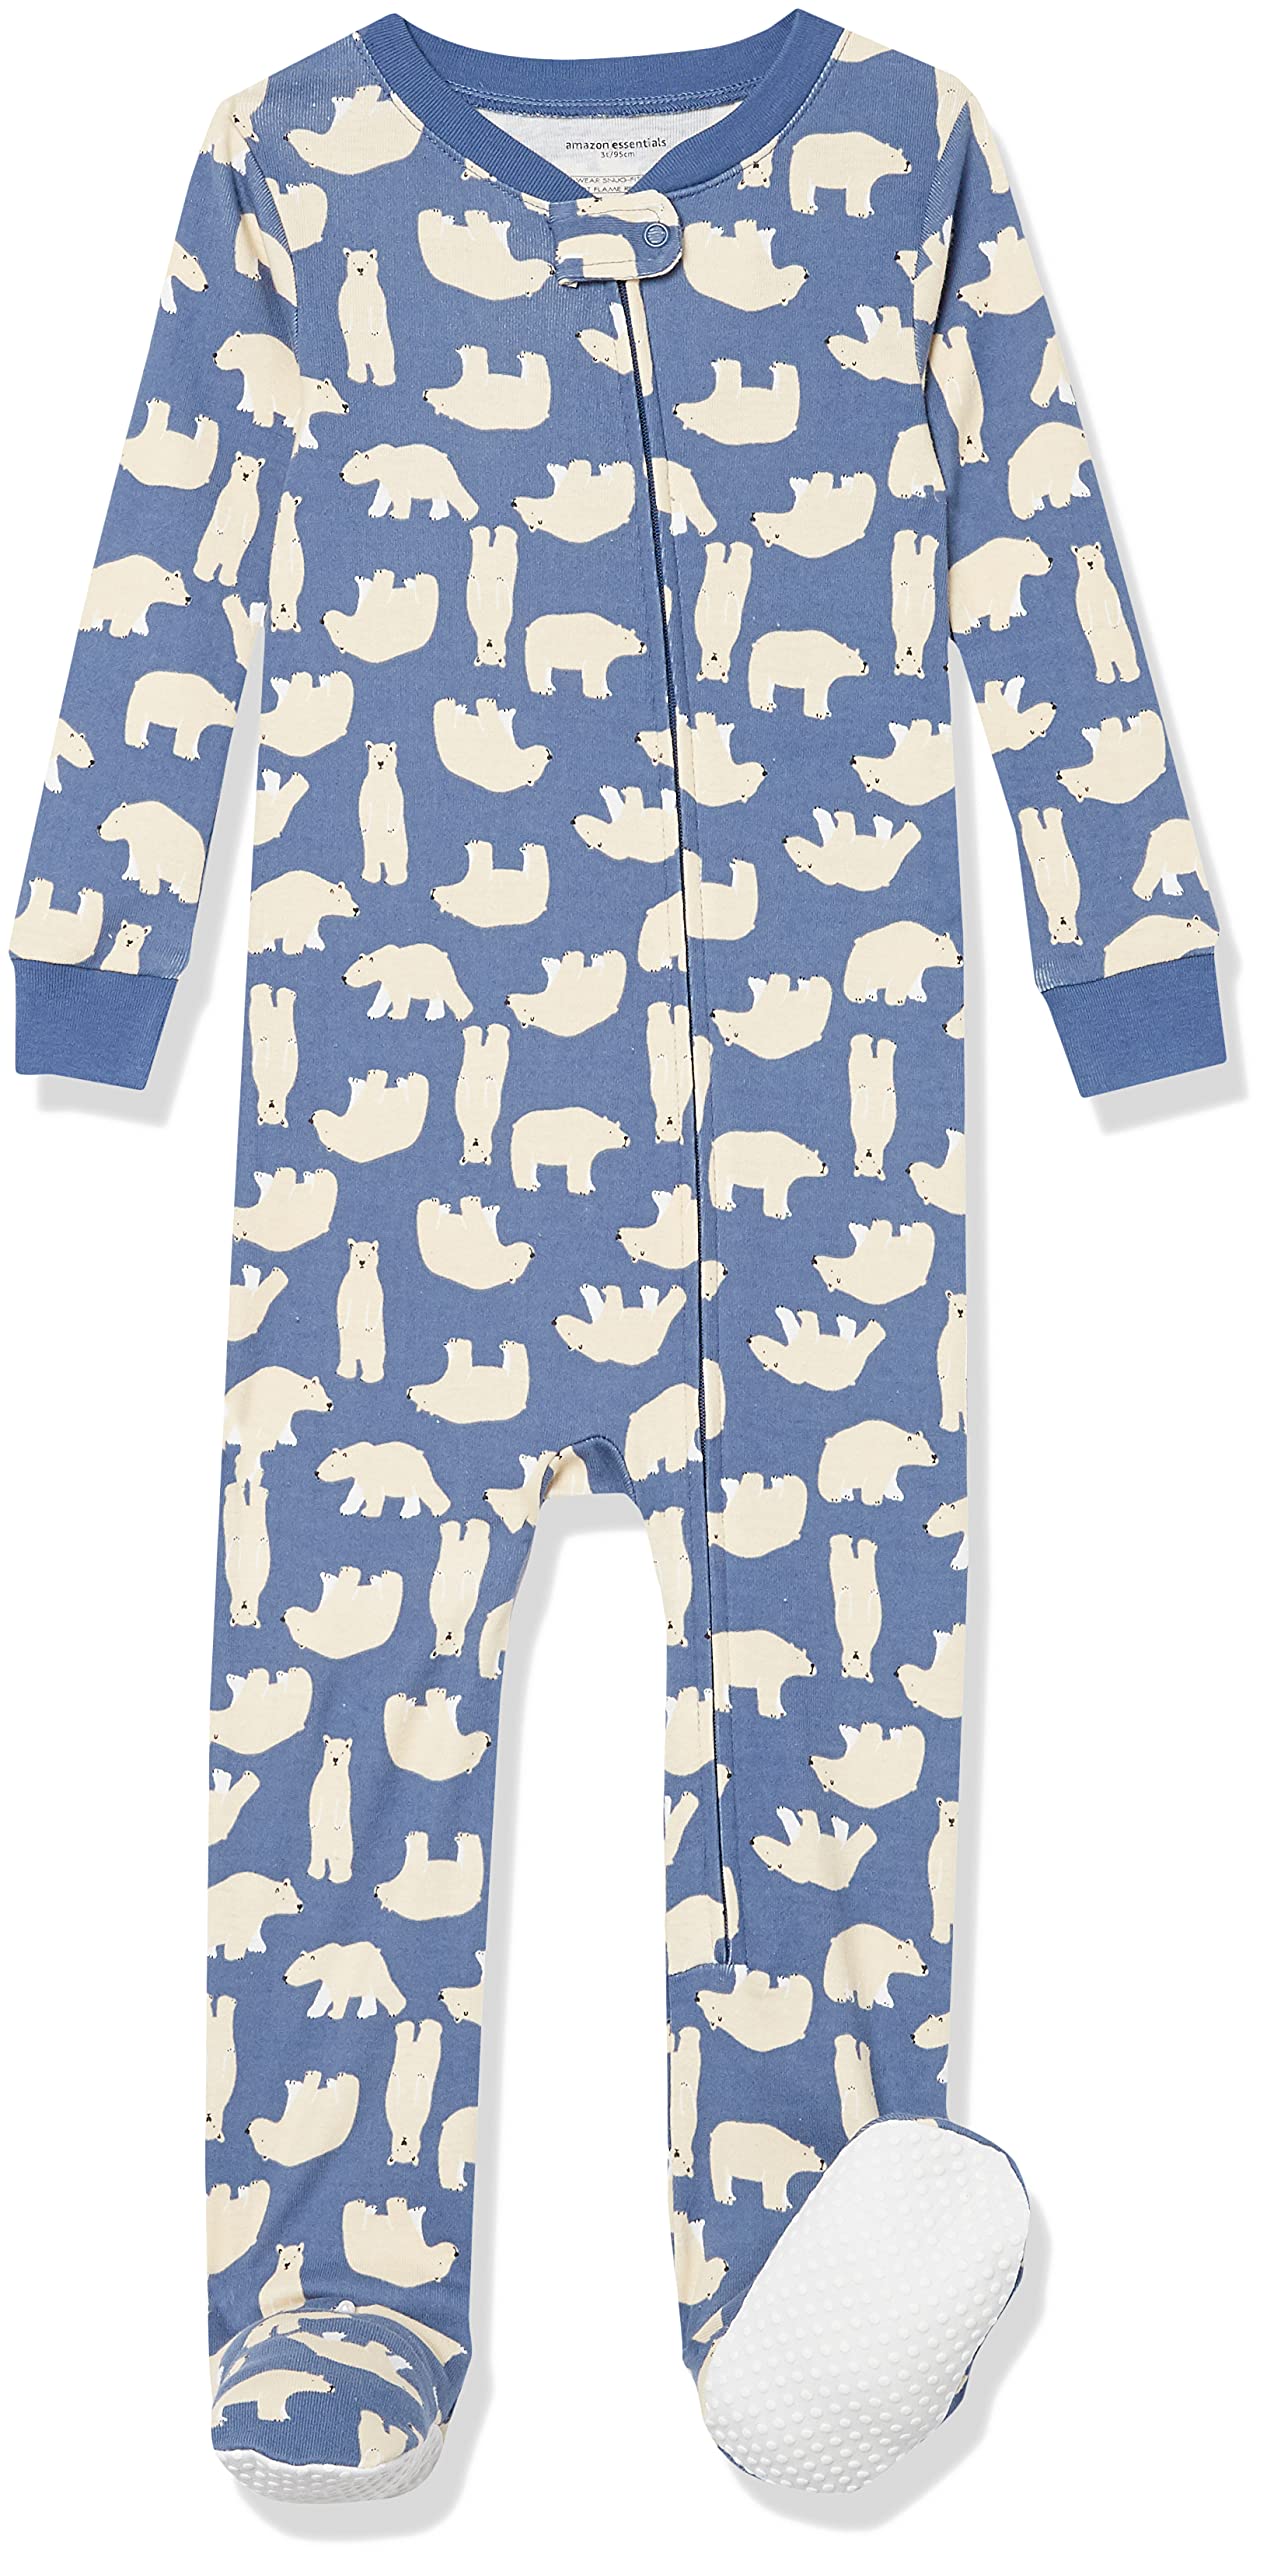 Amazon Essentials Unisex Toddlers and Babies' Snug-Fit Cotton Footed Sleeper Pajamas, Multipacks